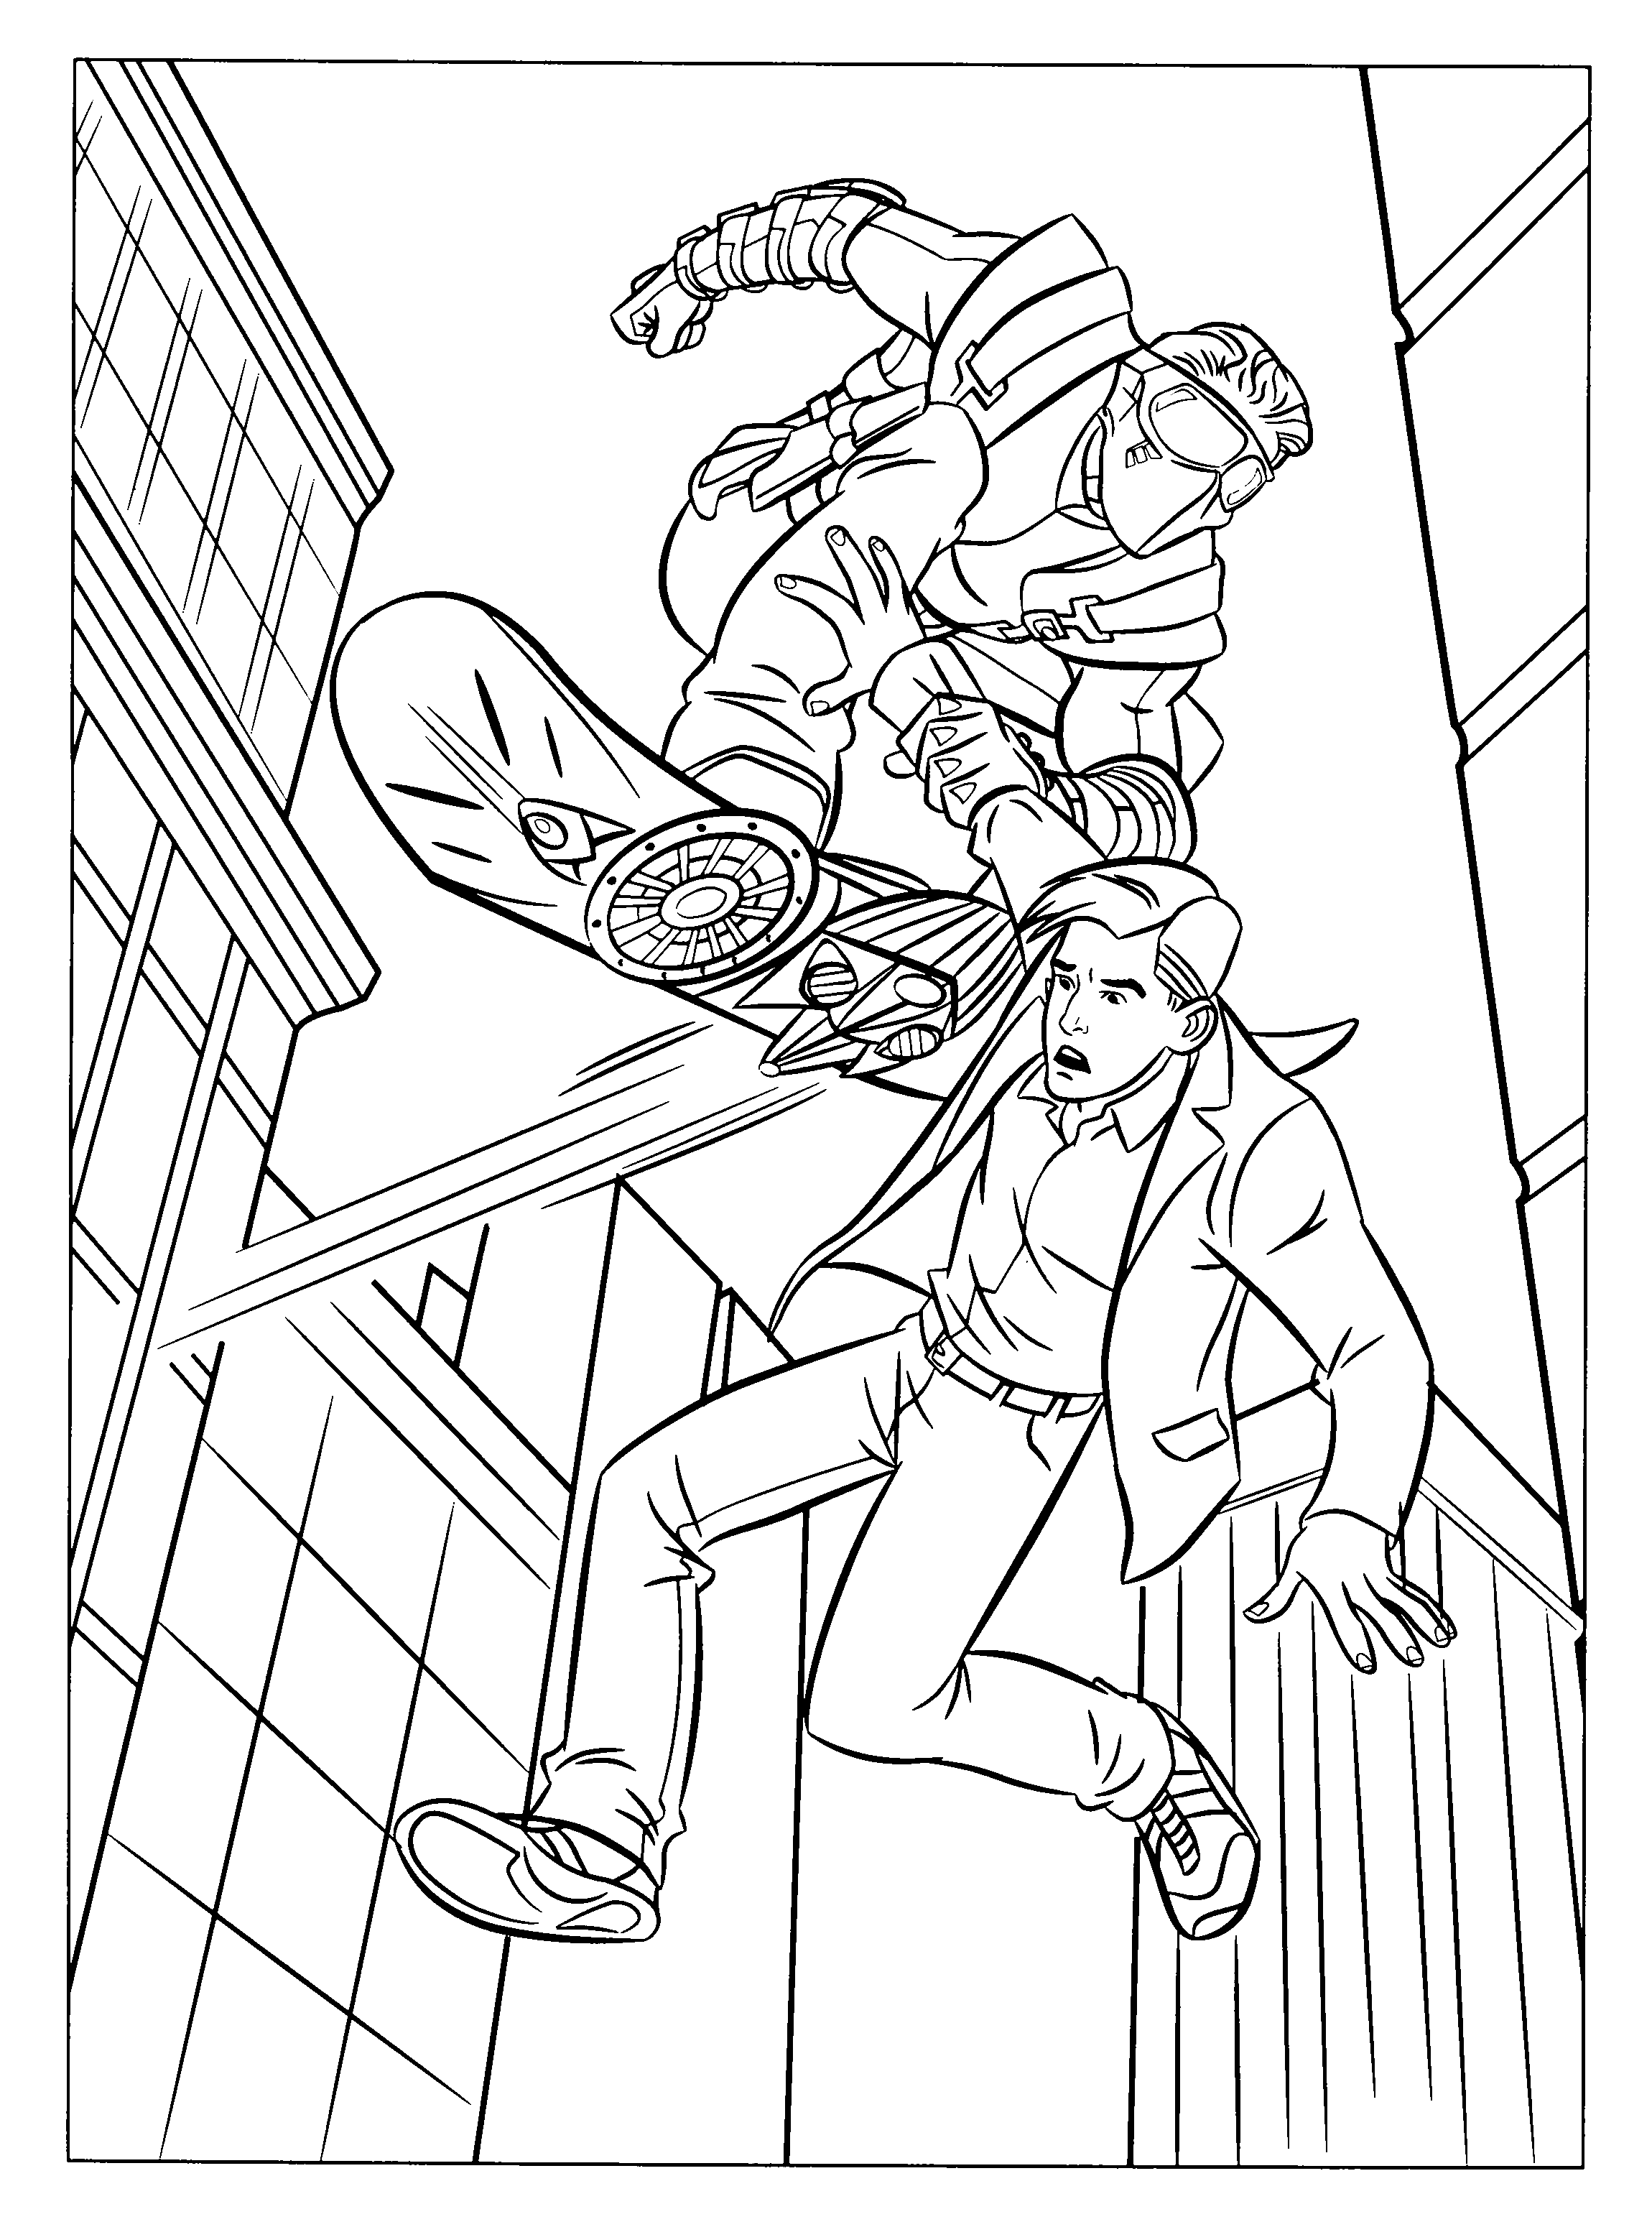 Coloring Page - Spiderman 3 coloring pages 23